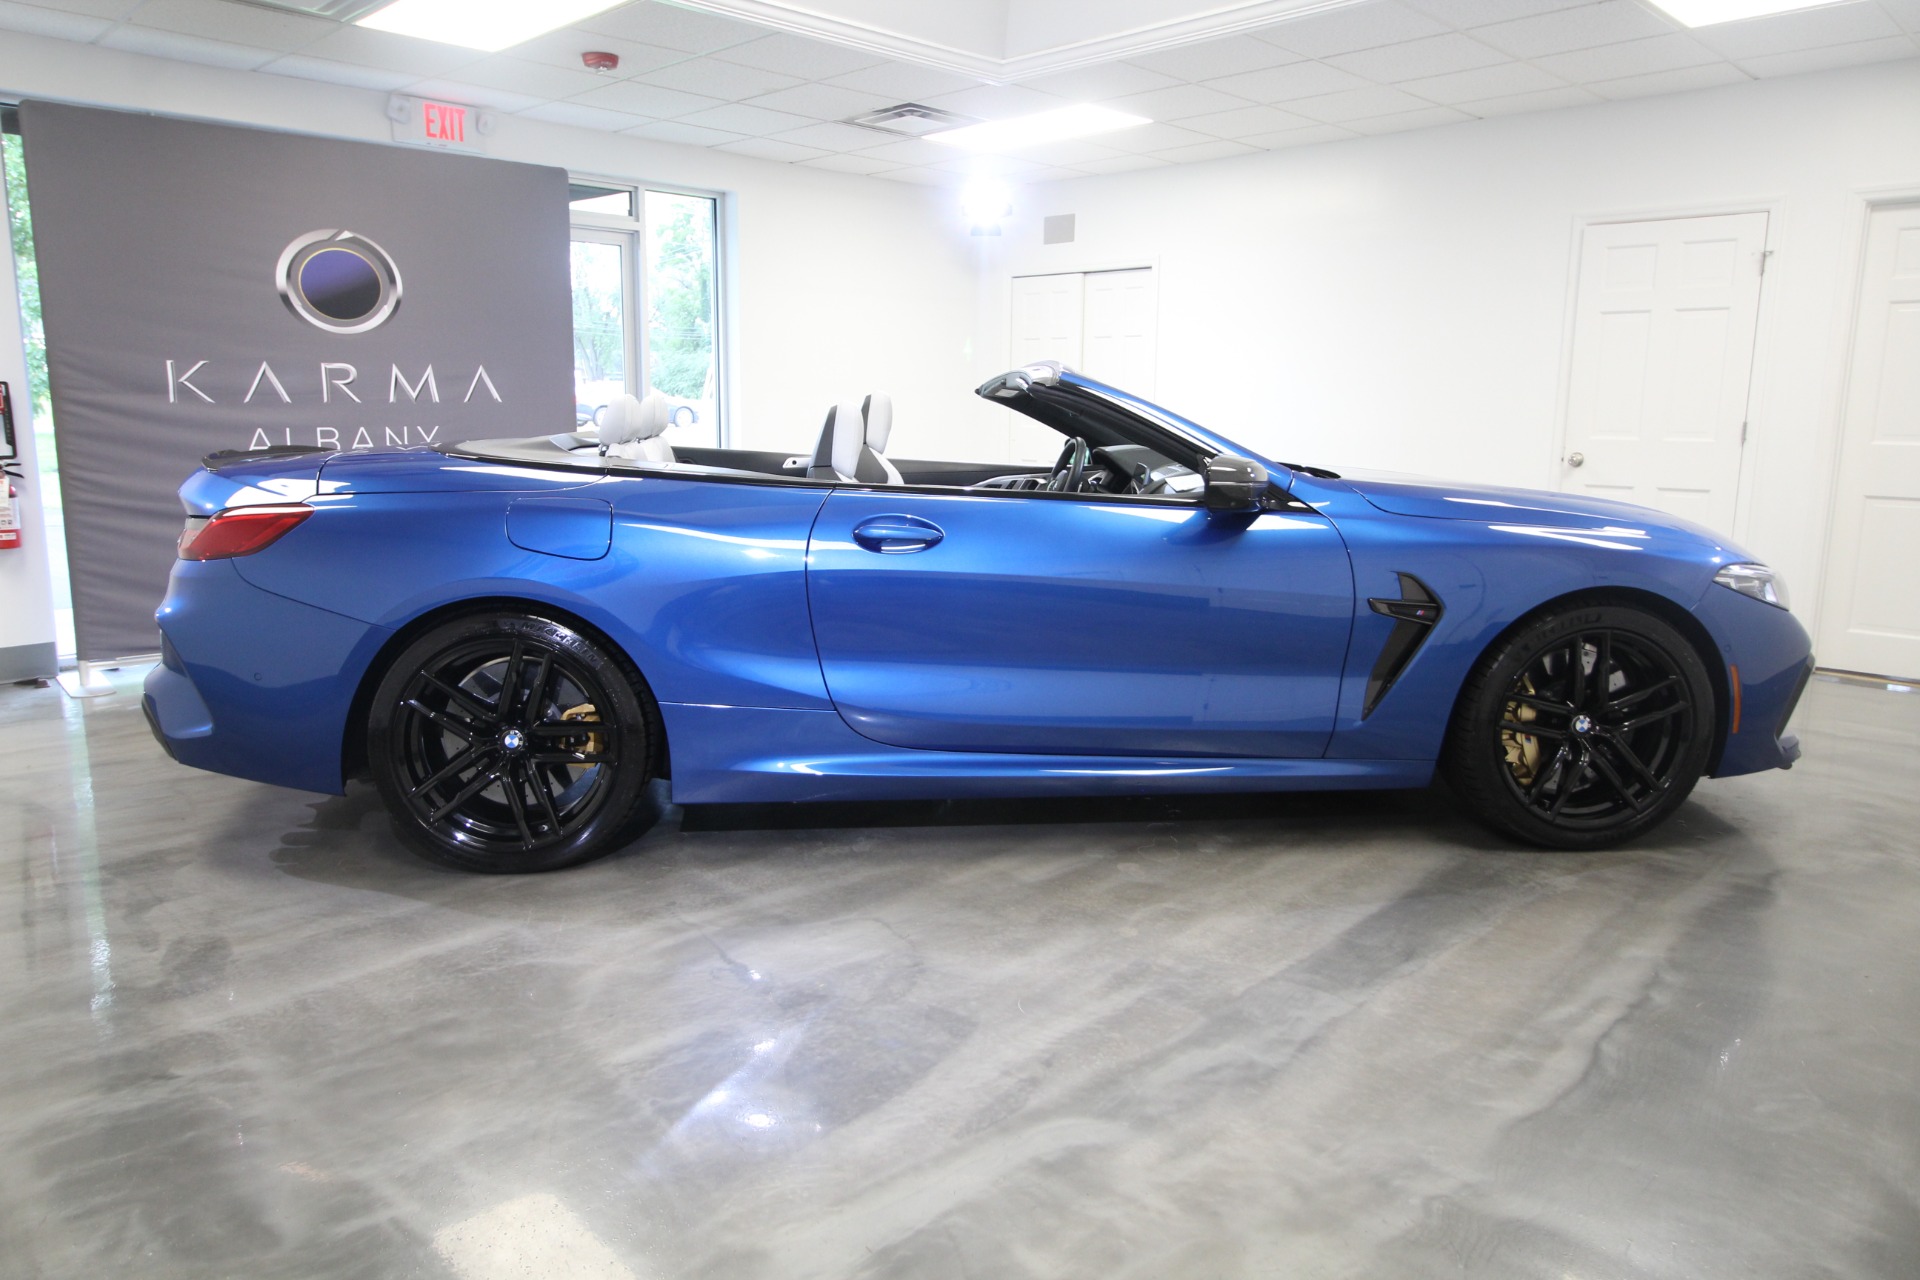 Used 2020 Sonic Speed Blue BMW M8 Convertible Competition Stunning Color Combo 177K MSRP New | Albany, NY